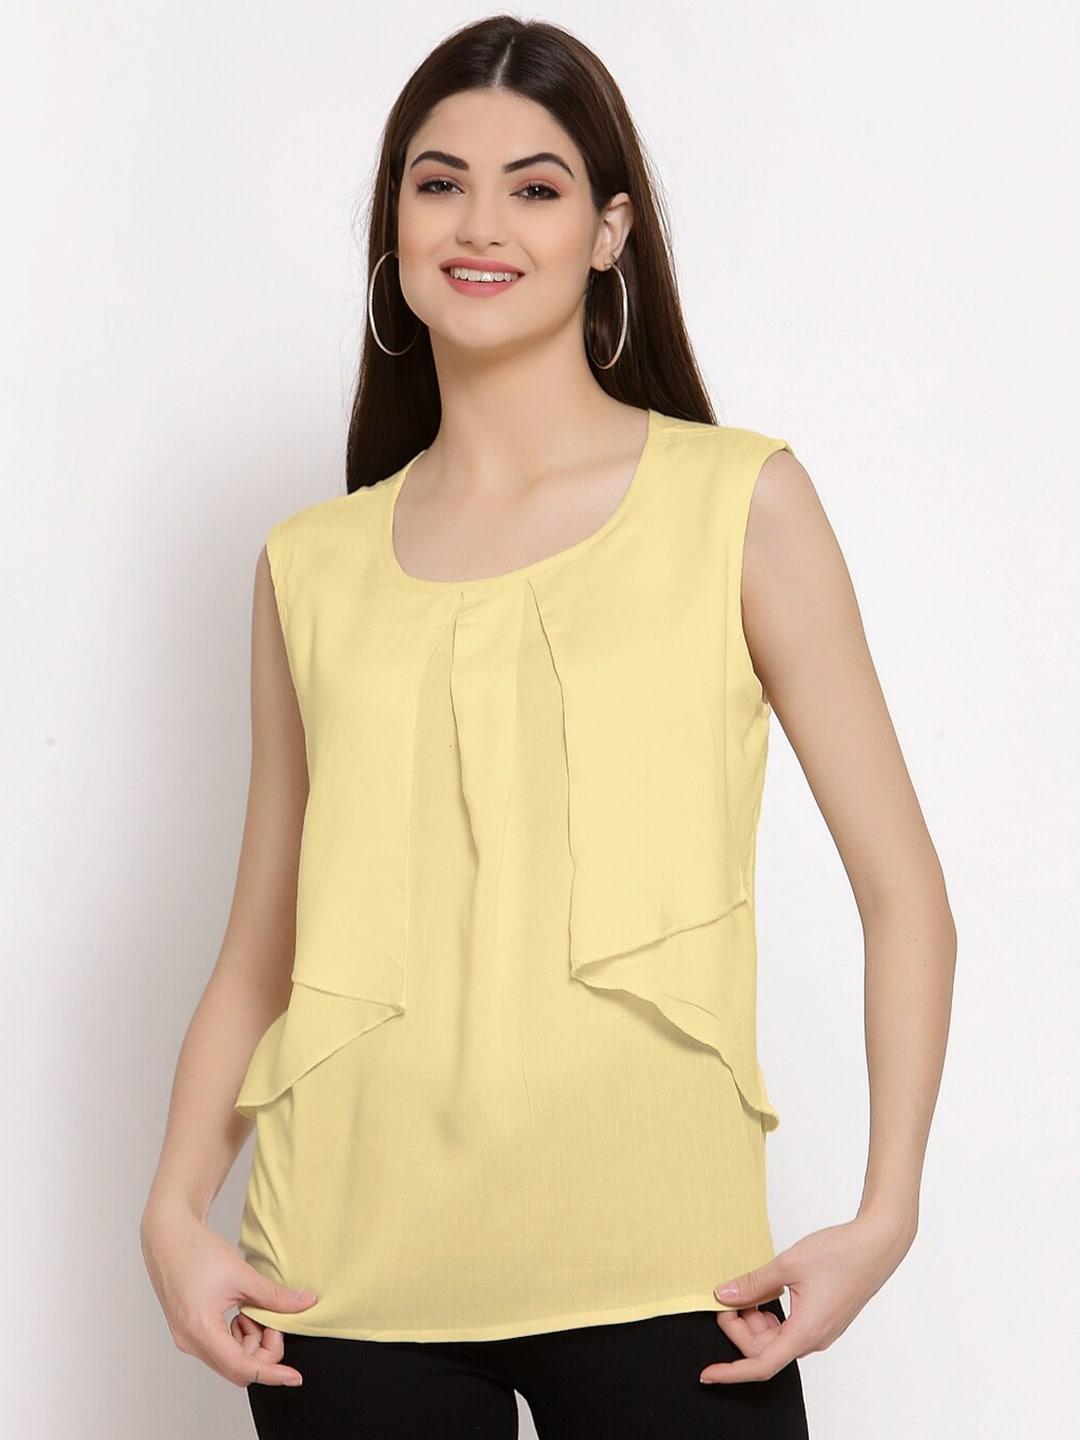 PATRORNA Gold-Toned Solid Layered Top